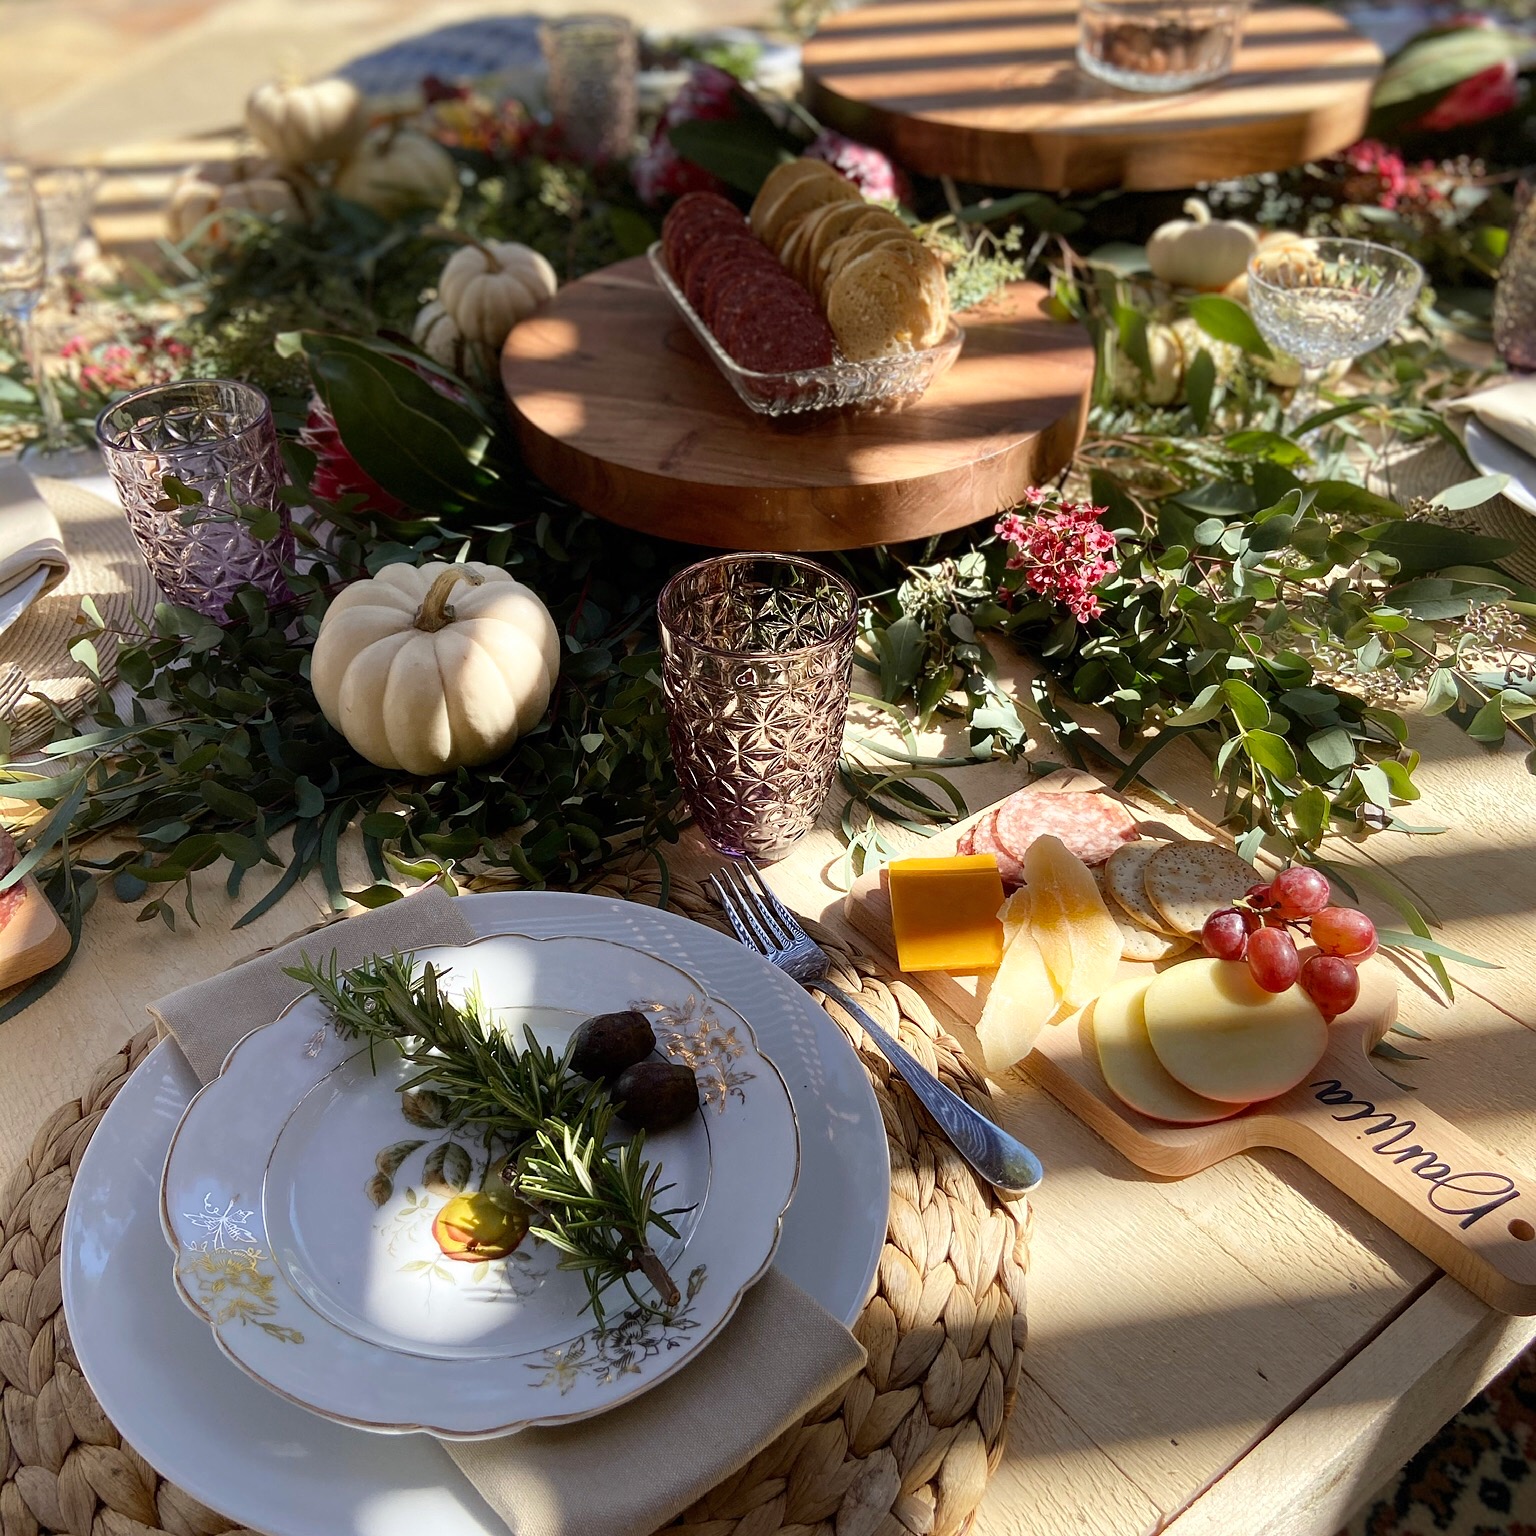 Create your own DIY Personalized Cheese Boards for your next event!